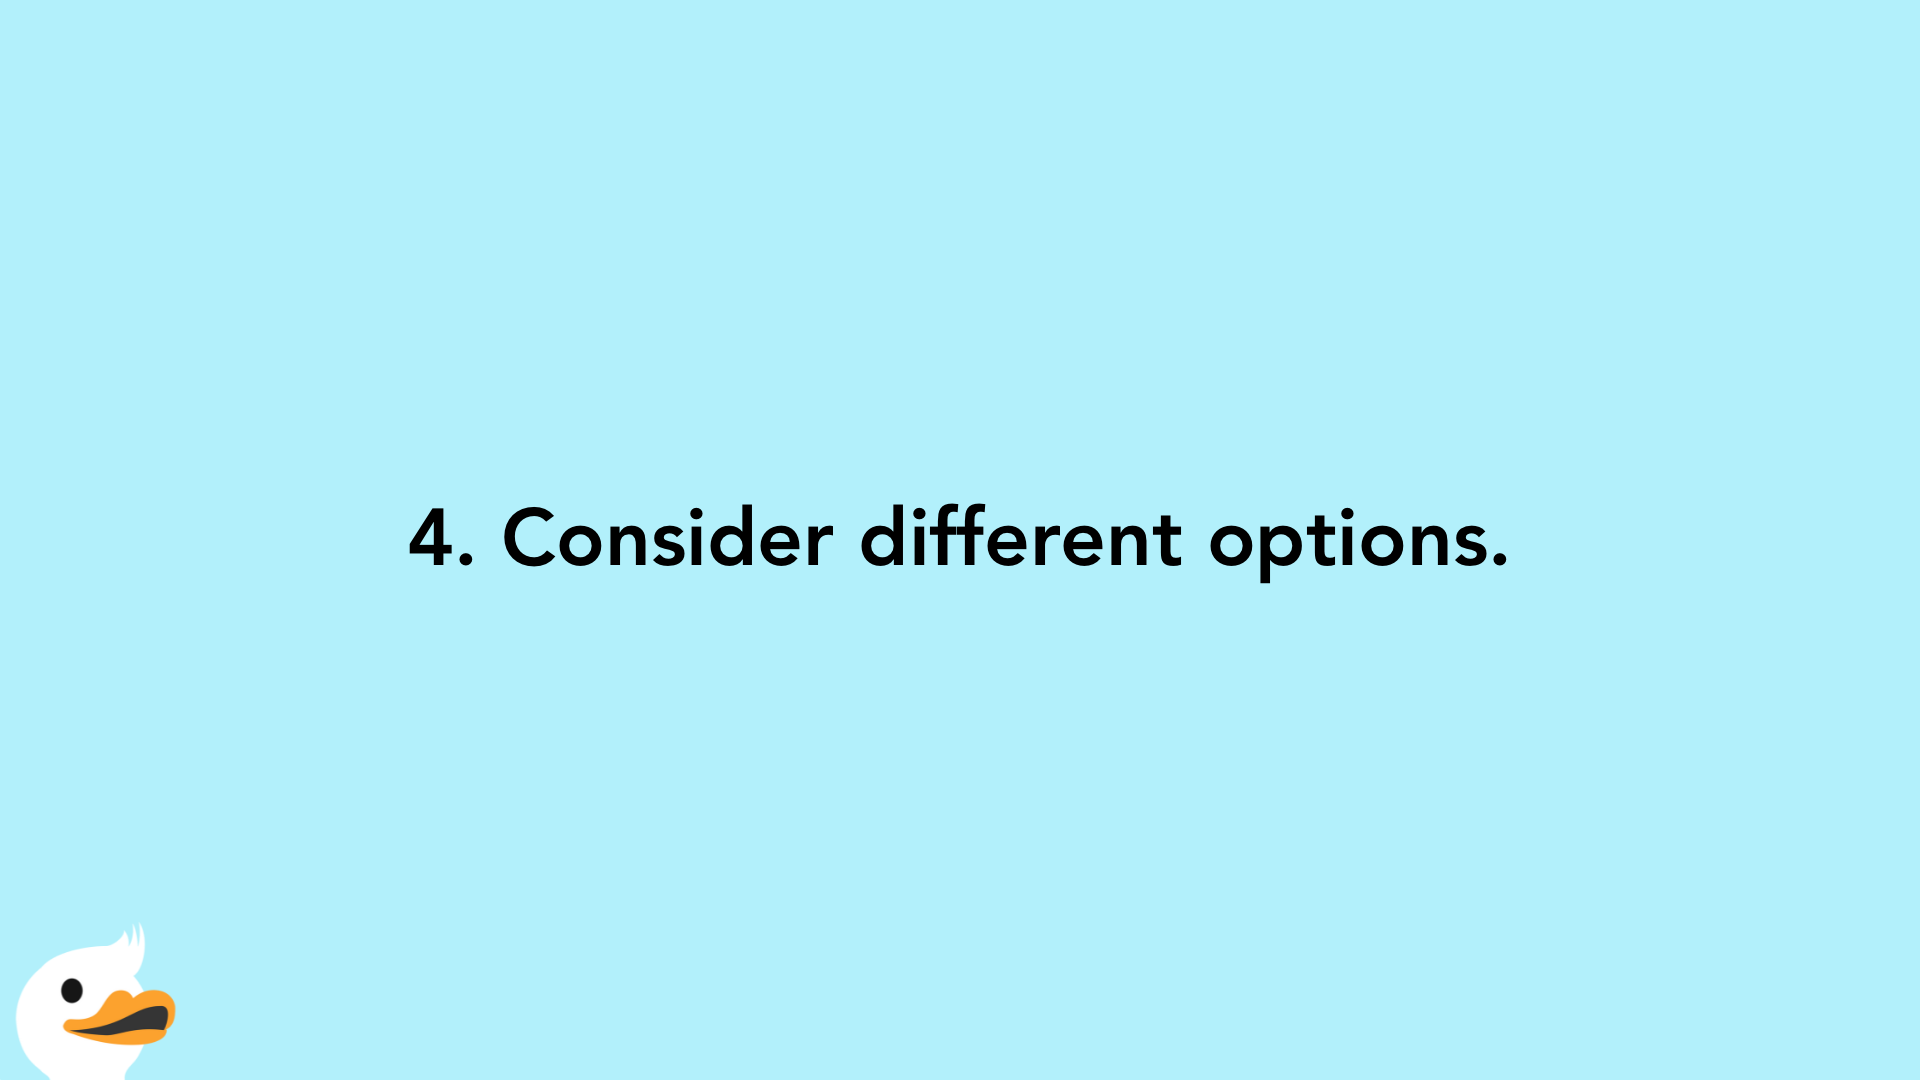 4. Consider different options.